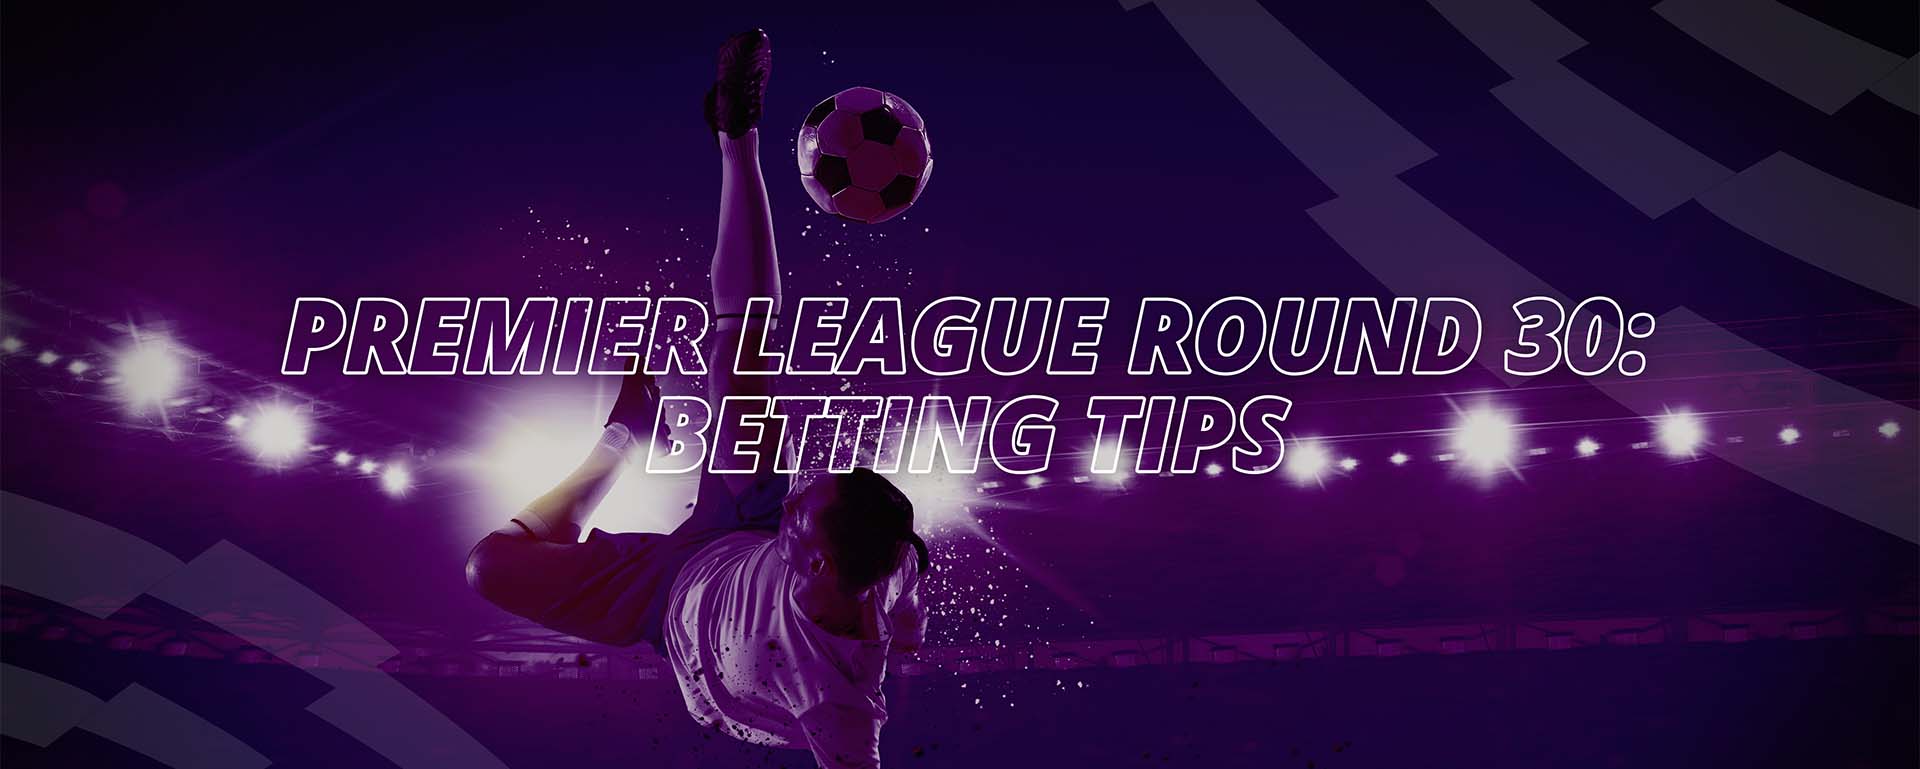 PREMIER LEAGUE ROUND 30: BETTING TIPS